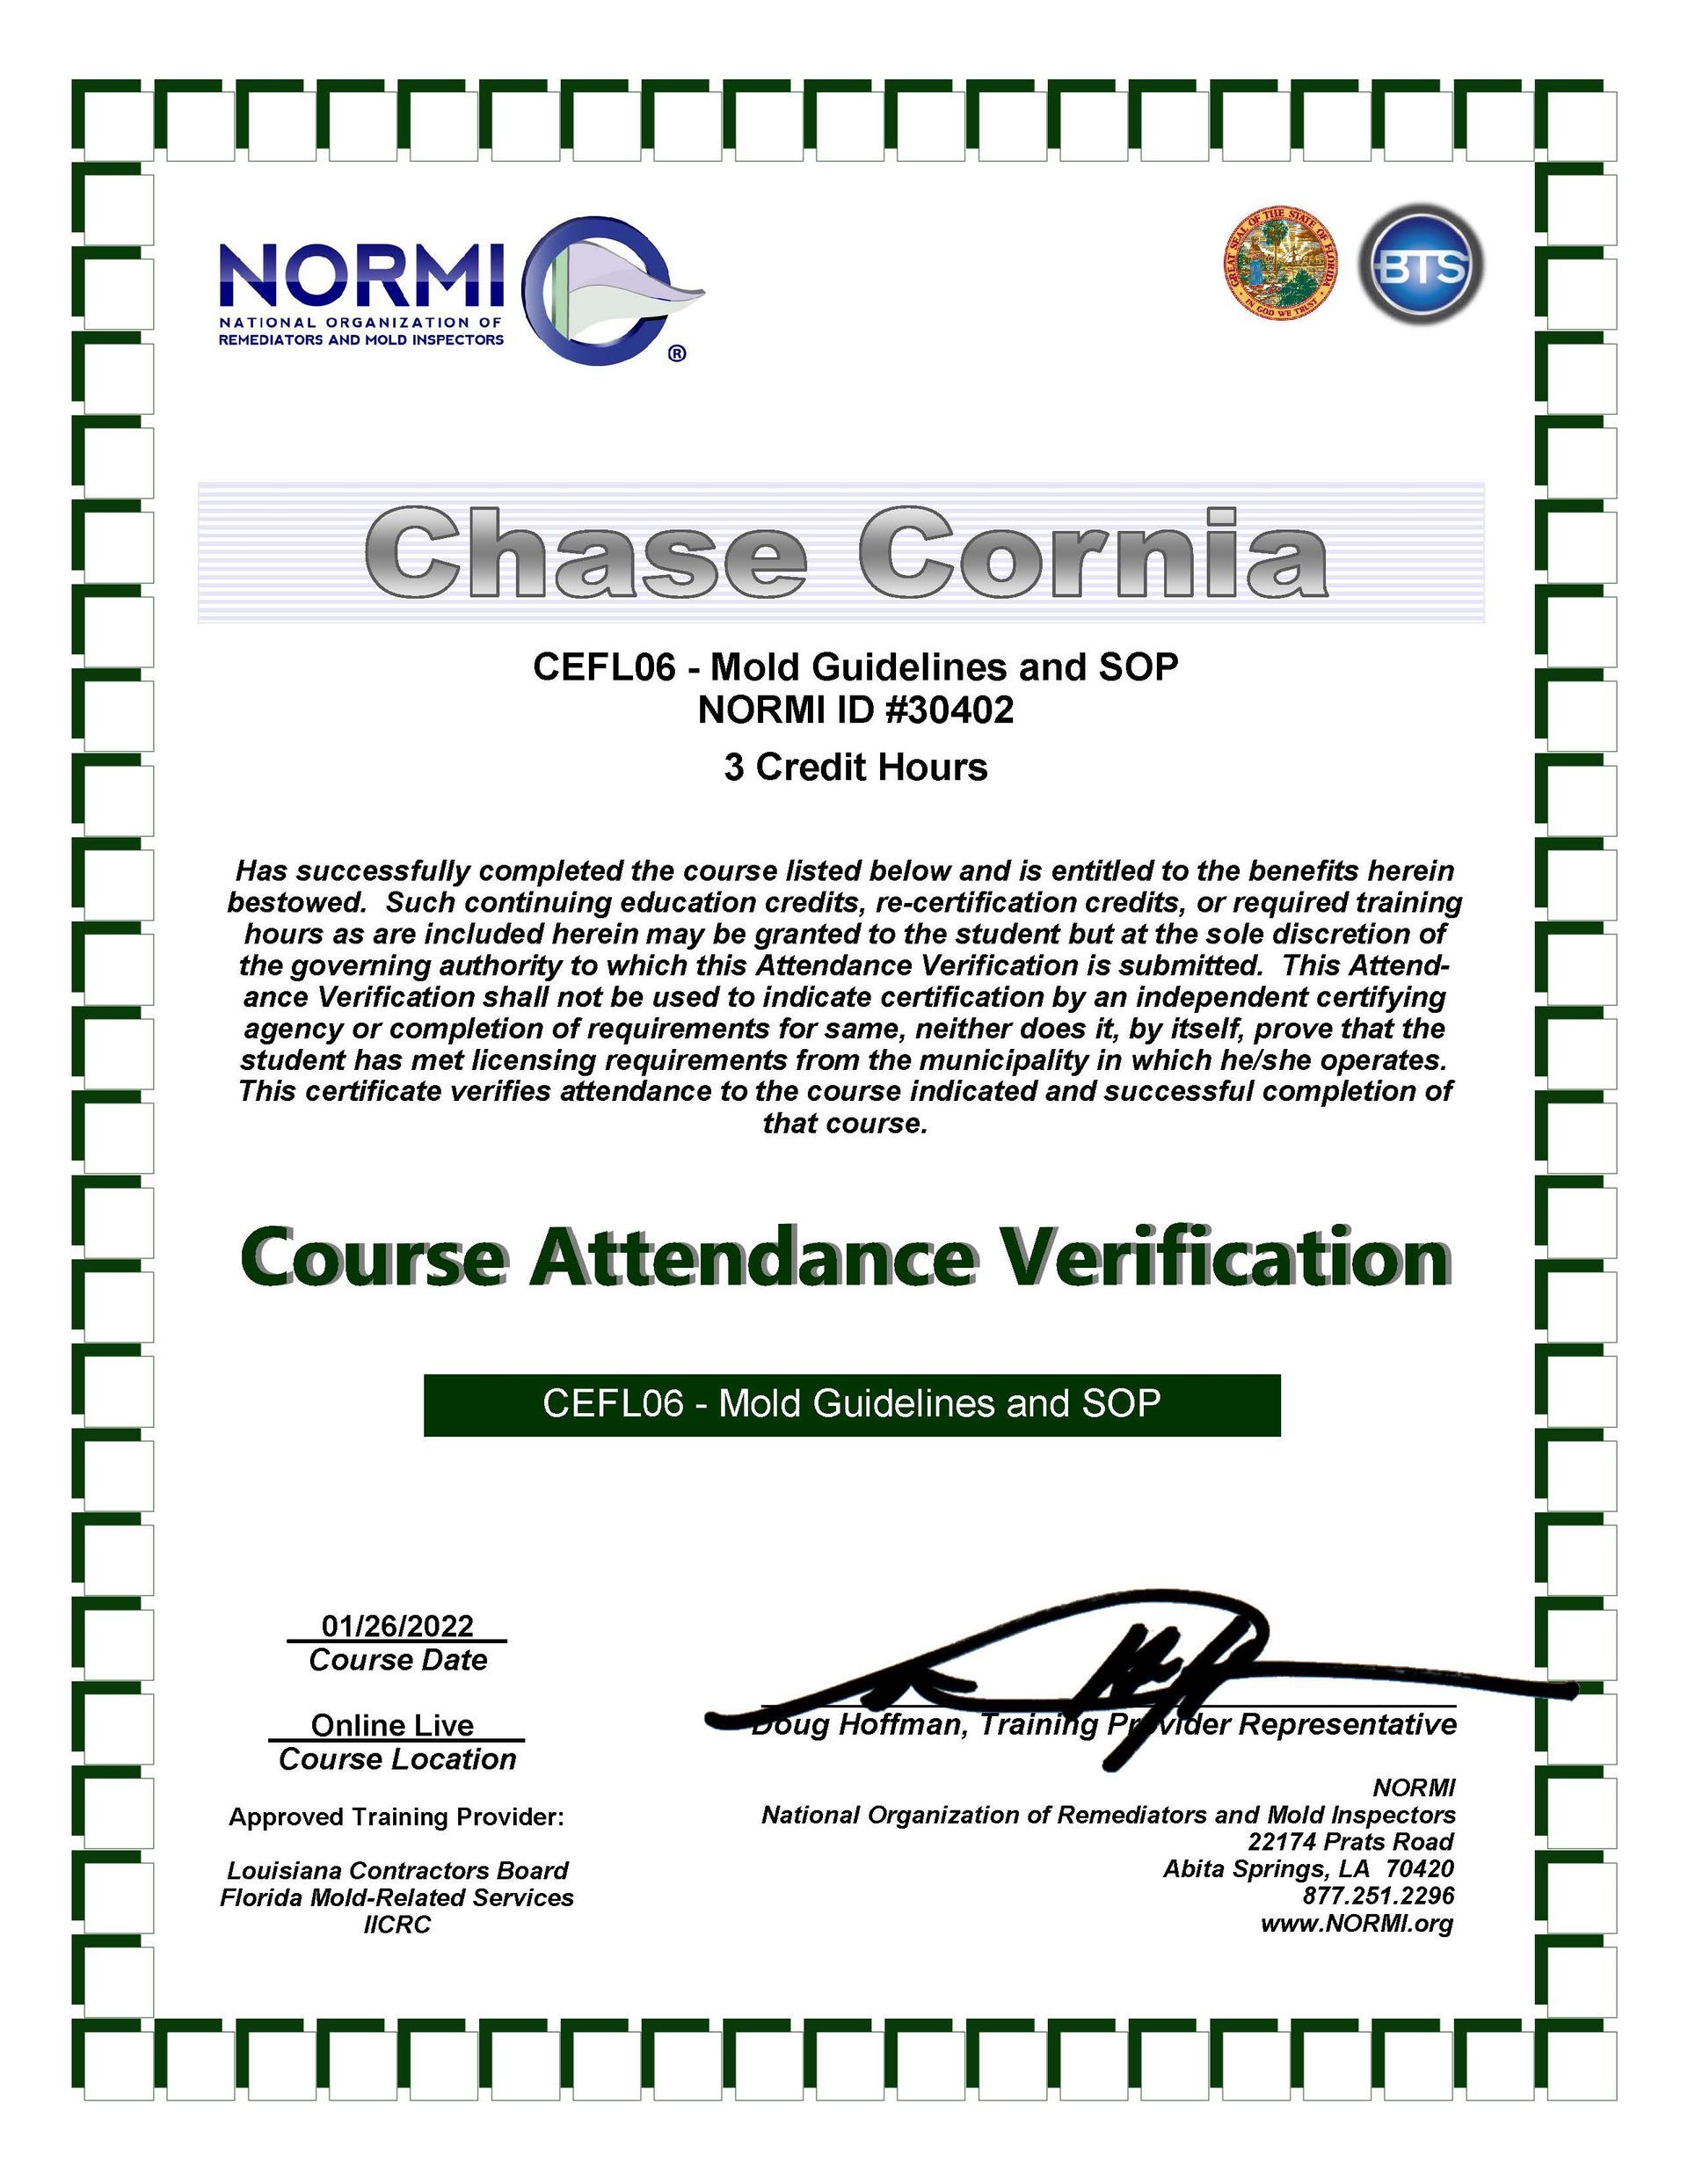 a certificate for chase cornia course attendance verification